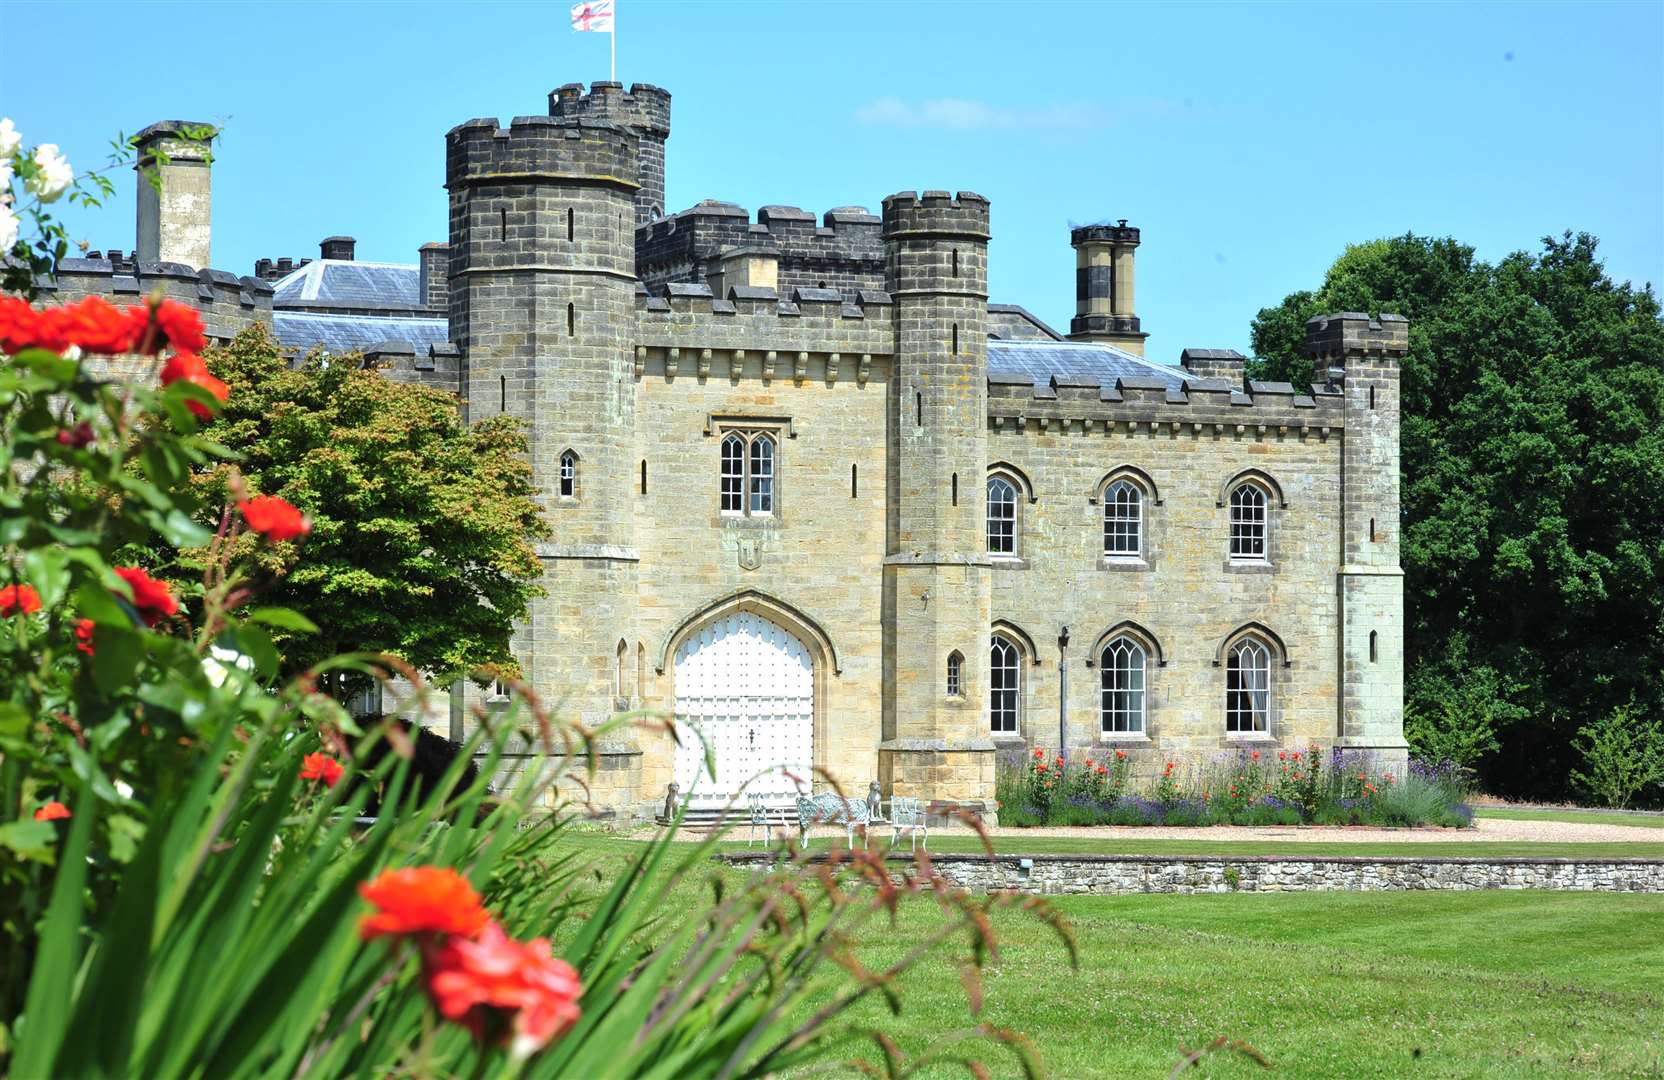 Chiddingstone Castle, near Tonbridge, is known for its popular literary festival. Picture: Darryl Curcher Photography